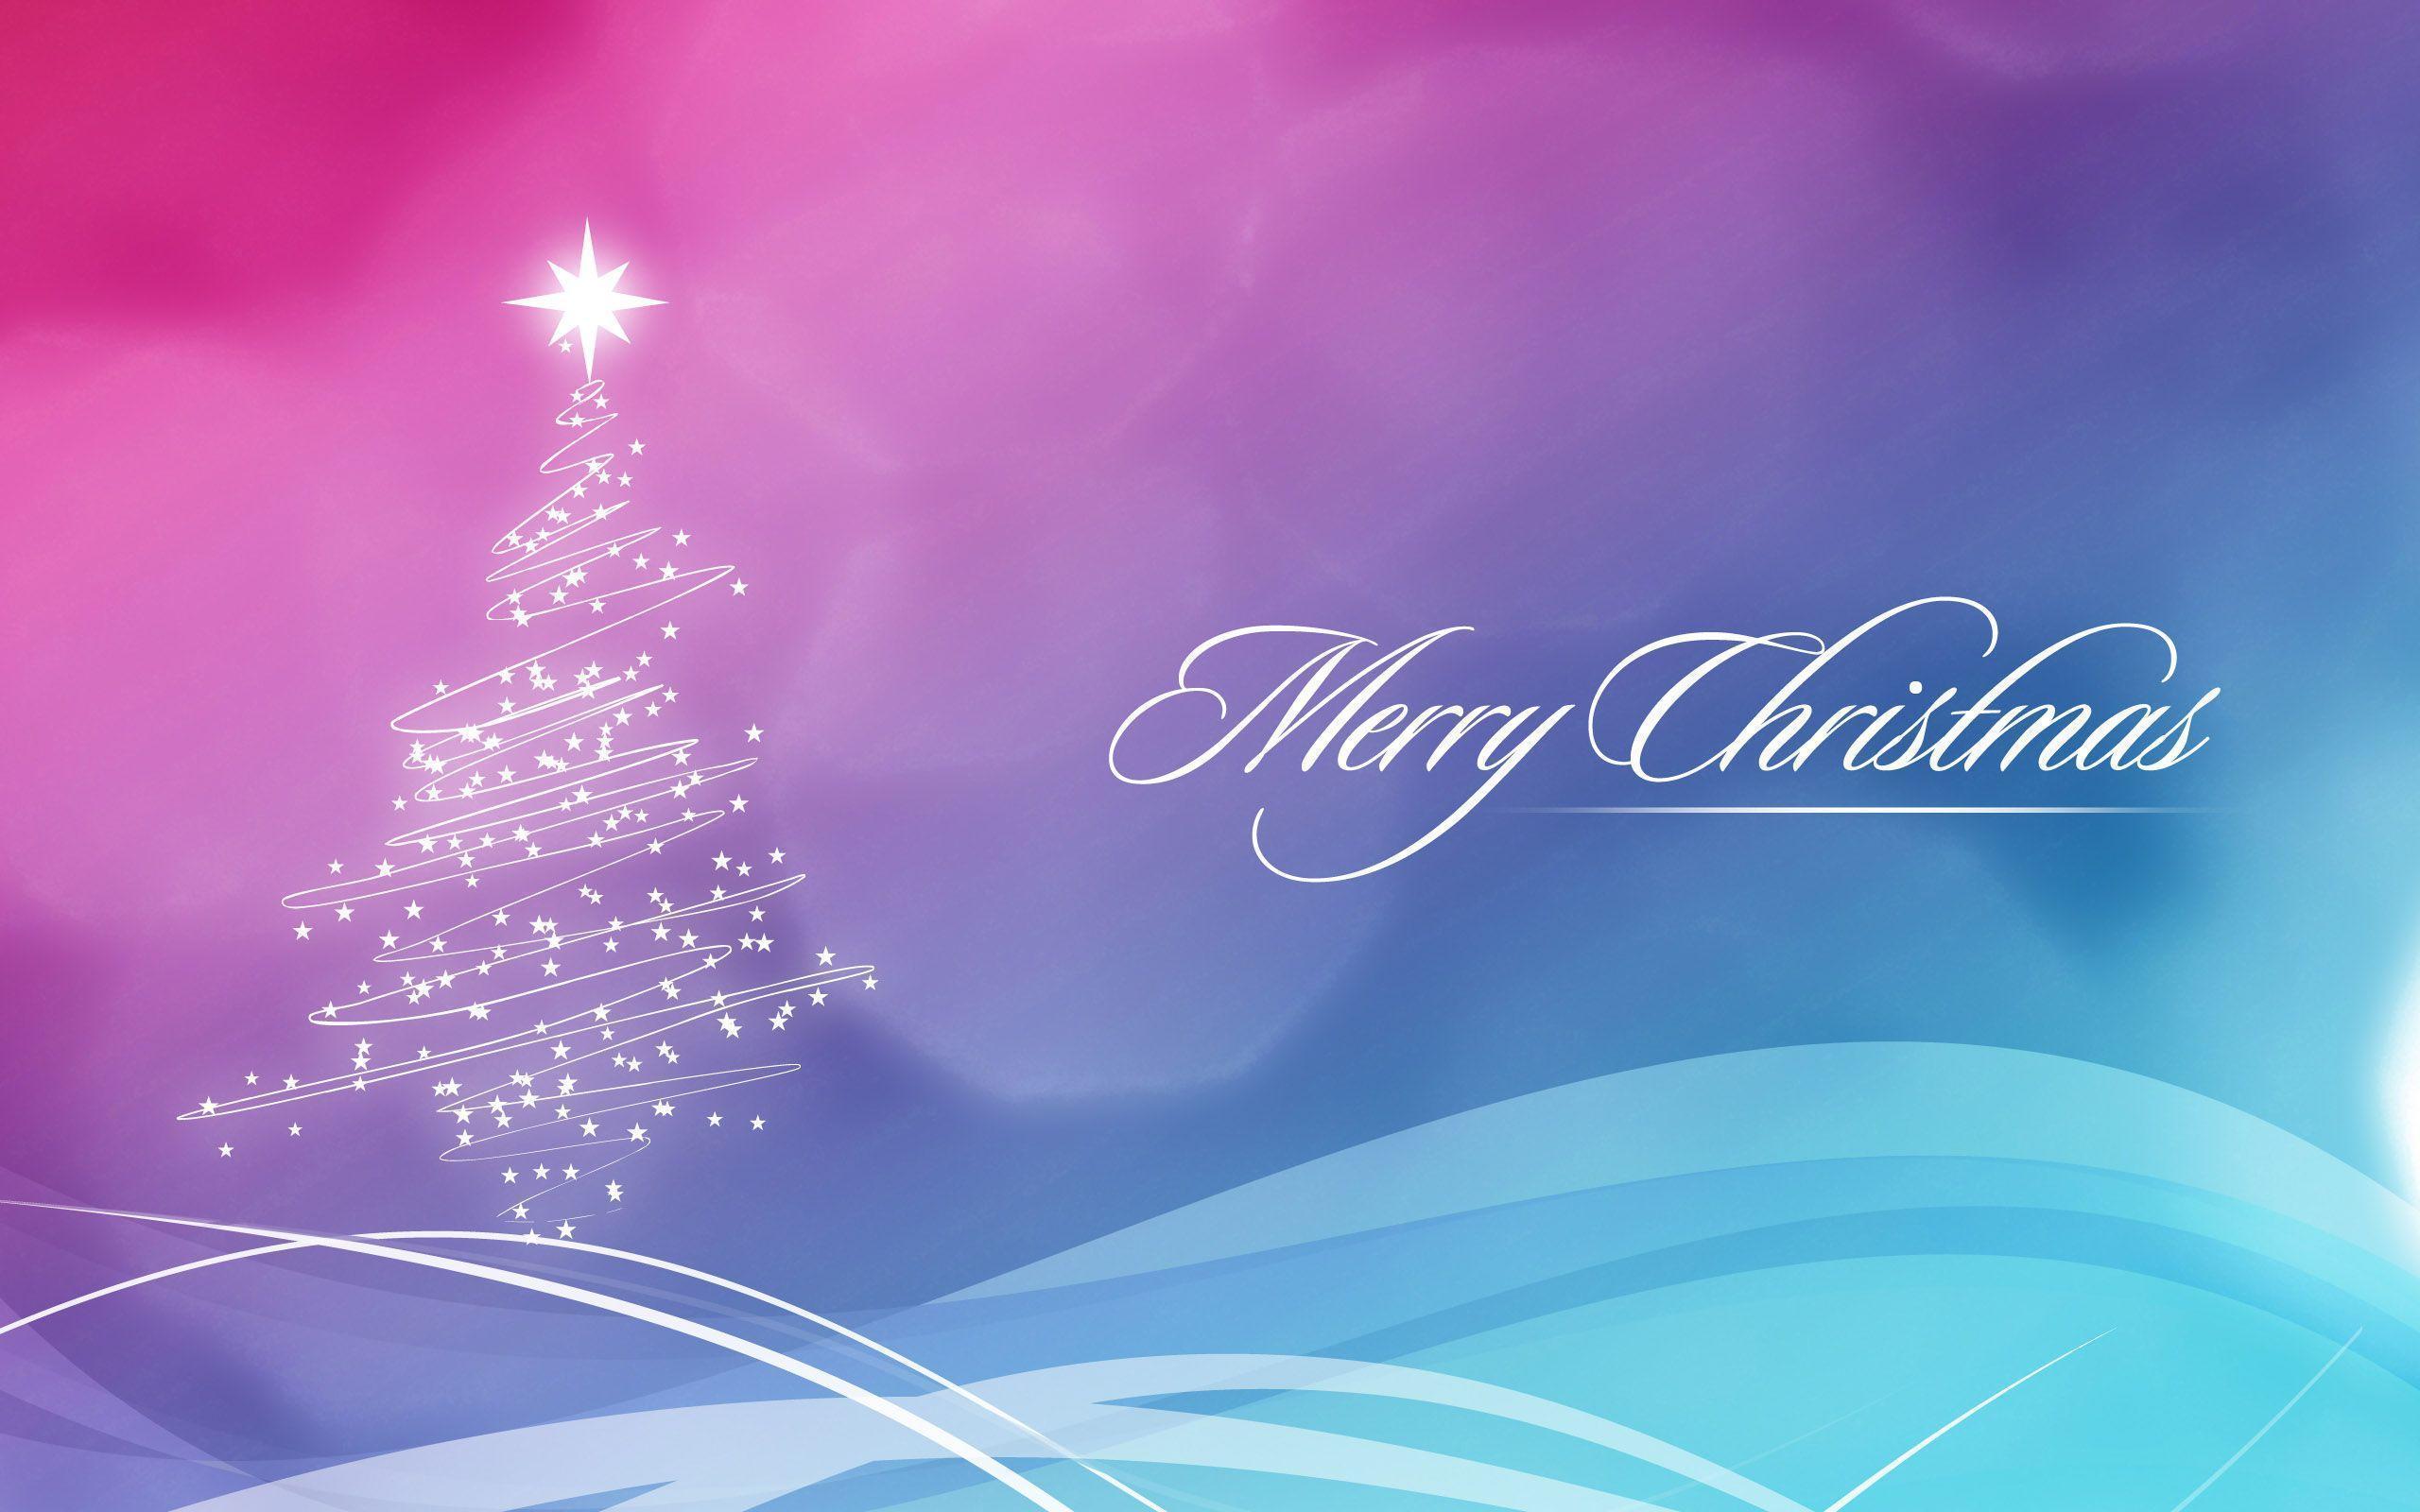 Beautiful HD Christmas Wallpaper for 2014. Christmas Messages 2014